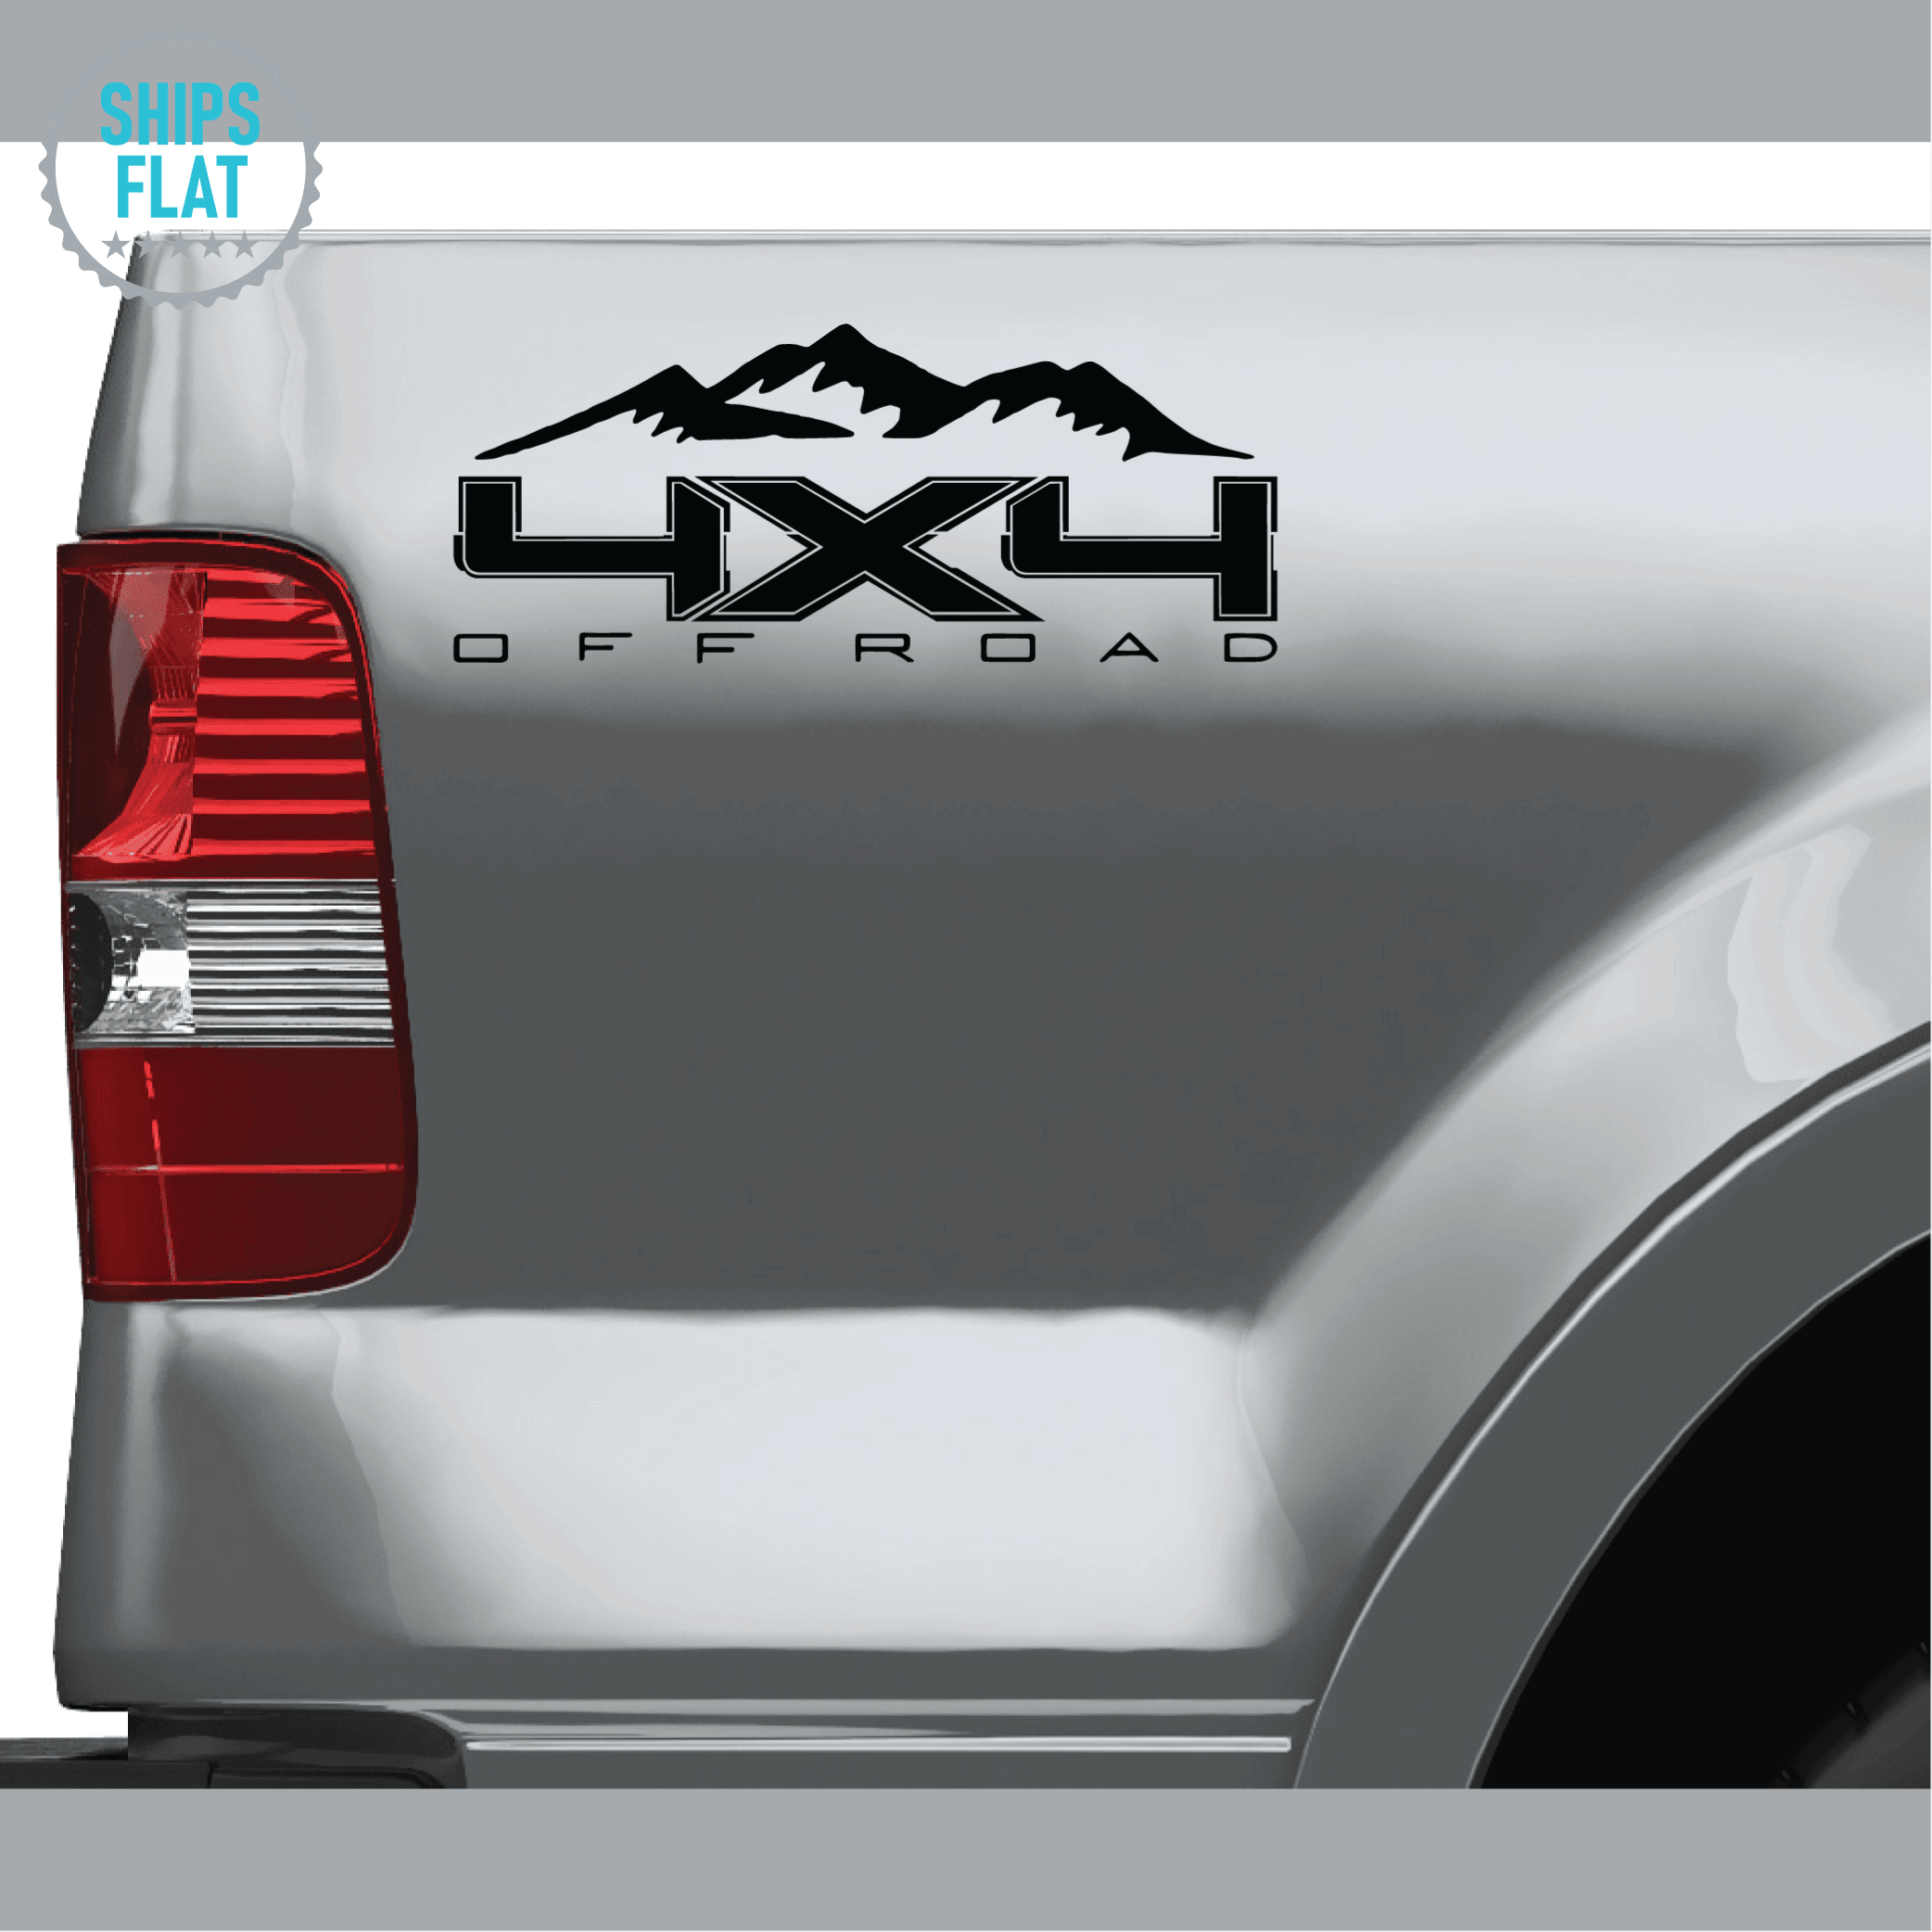 Off Road Sticker – P & S Detail Products